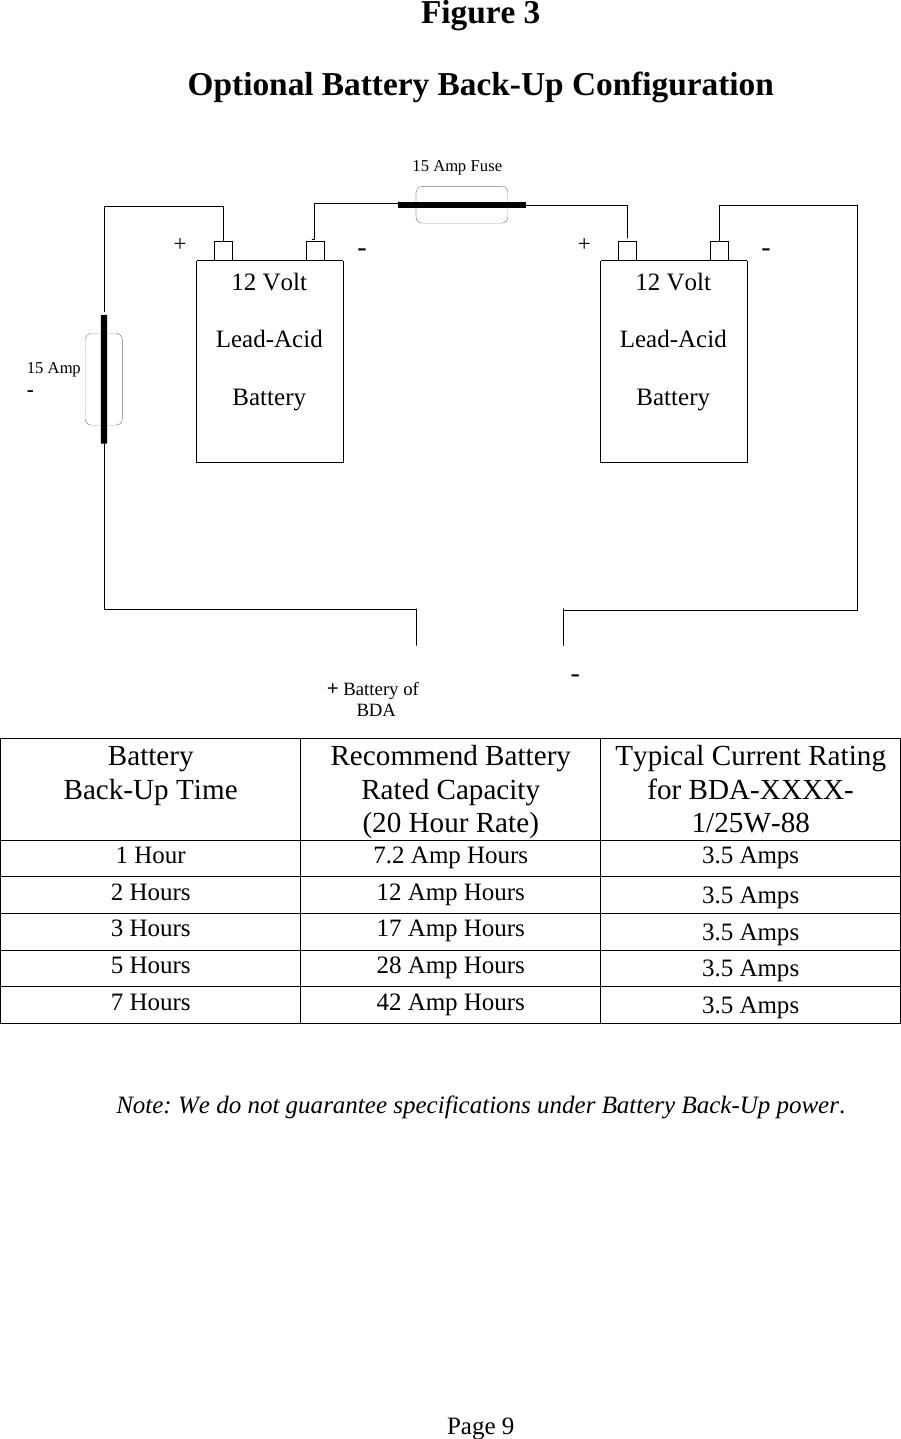  Figure 3  Optional Battery Back-Up Configuration  15 Amp - 12 Volt  Lead-Acid  Battery  12 Volt  Lead-Acid  Battery  -+- -+ Battery of  BDA+ 15 Amp Fuse Battery  Back-Up Time  Recommend Battery Rated Capacity (20 Hour Rate) Typical Current Rating for BDA-XXXX-1/25W-88 1 Hour  7.2 Amp Hours  3.5 Amps 2 Hours  12 Amp Hours  3.5 Amps 3 Hours  17 Amp Hours  3.5 Amps 5 Hours  28 Amp Hours  3.5 Amps 7 Hours  42 Amp Hours  3.5 Amps   Note: We do not guarantee specifications under Battery Back-Up power.           Page 9 